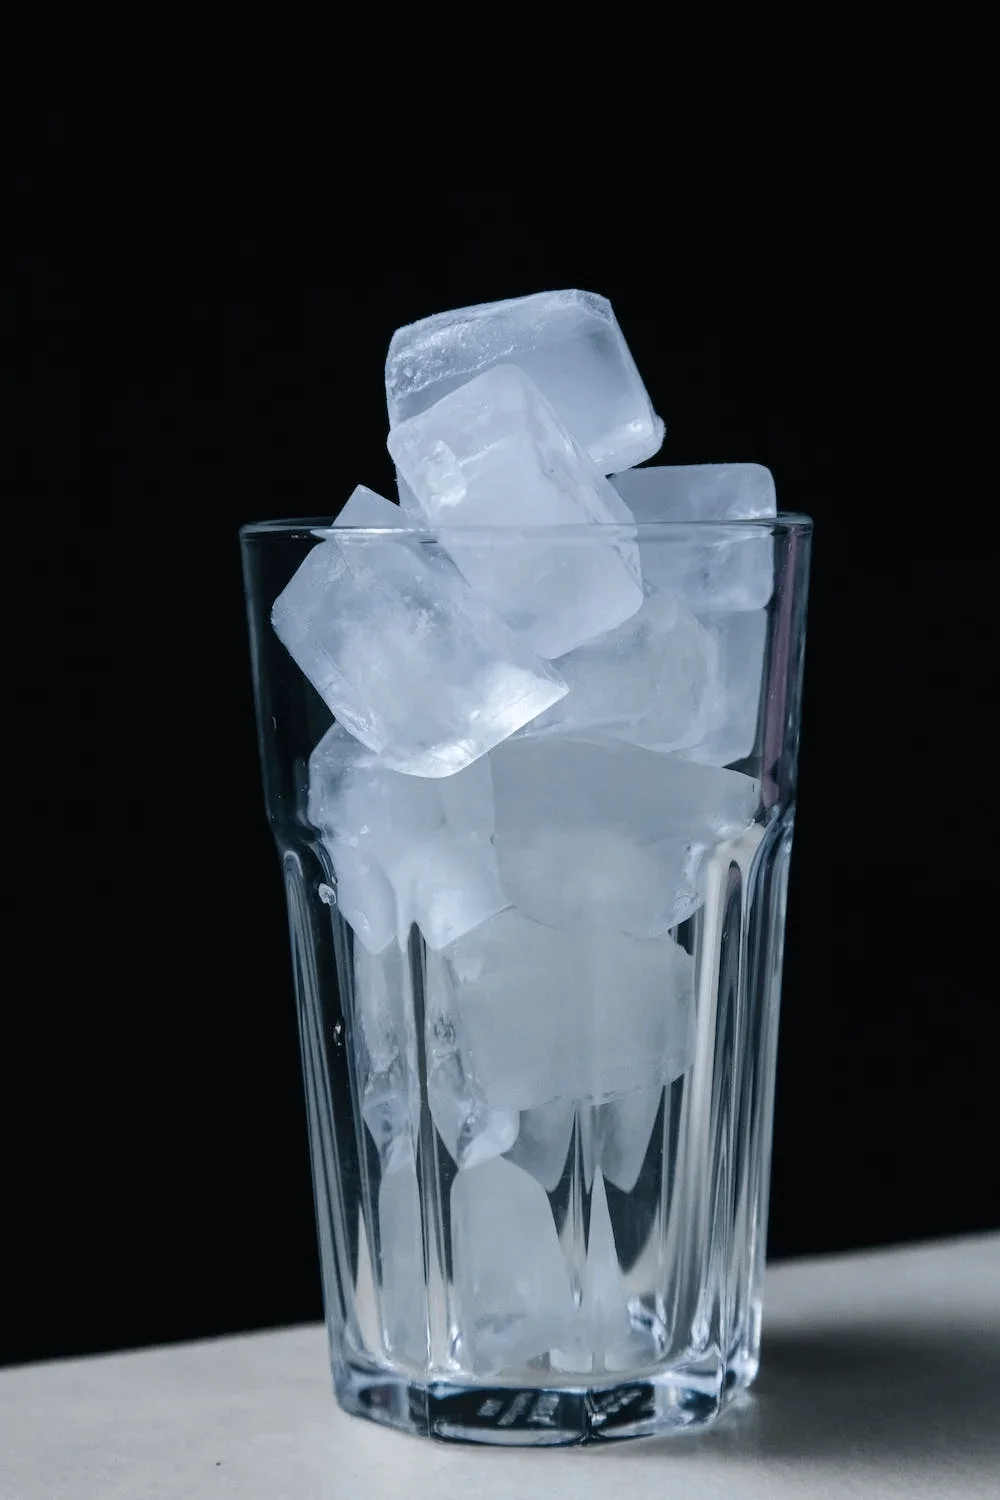 ice-cubes-in-glass